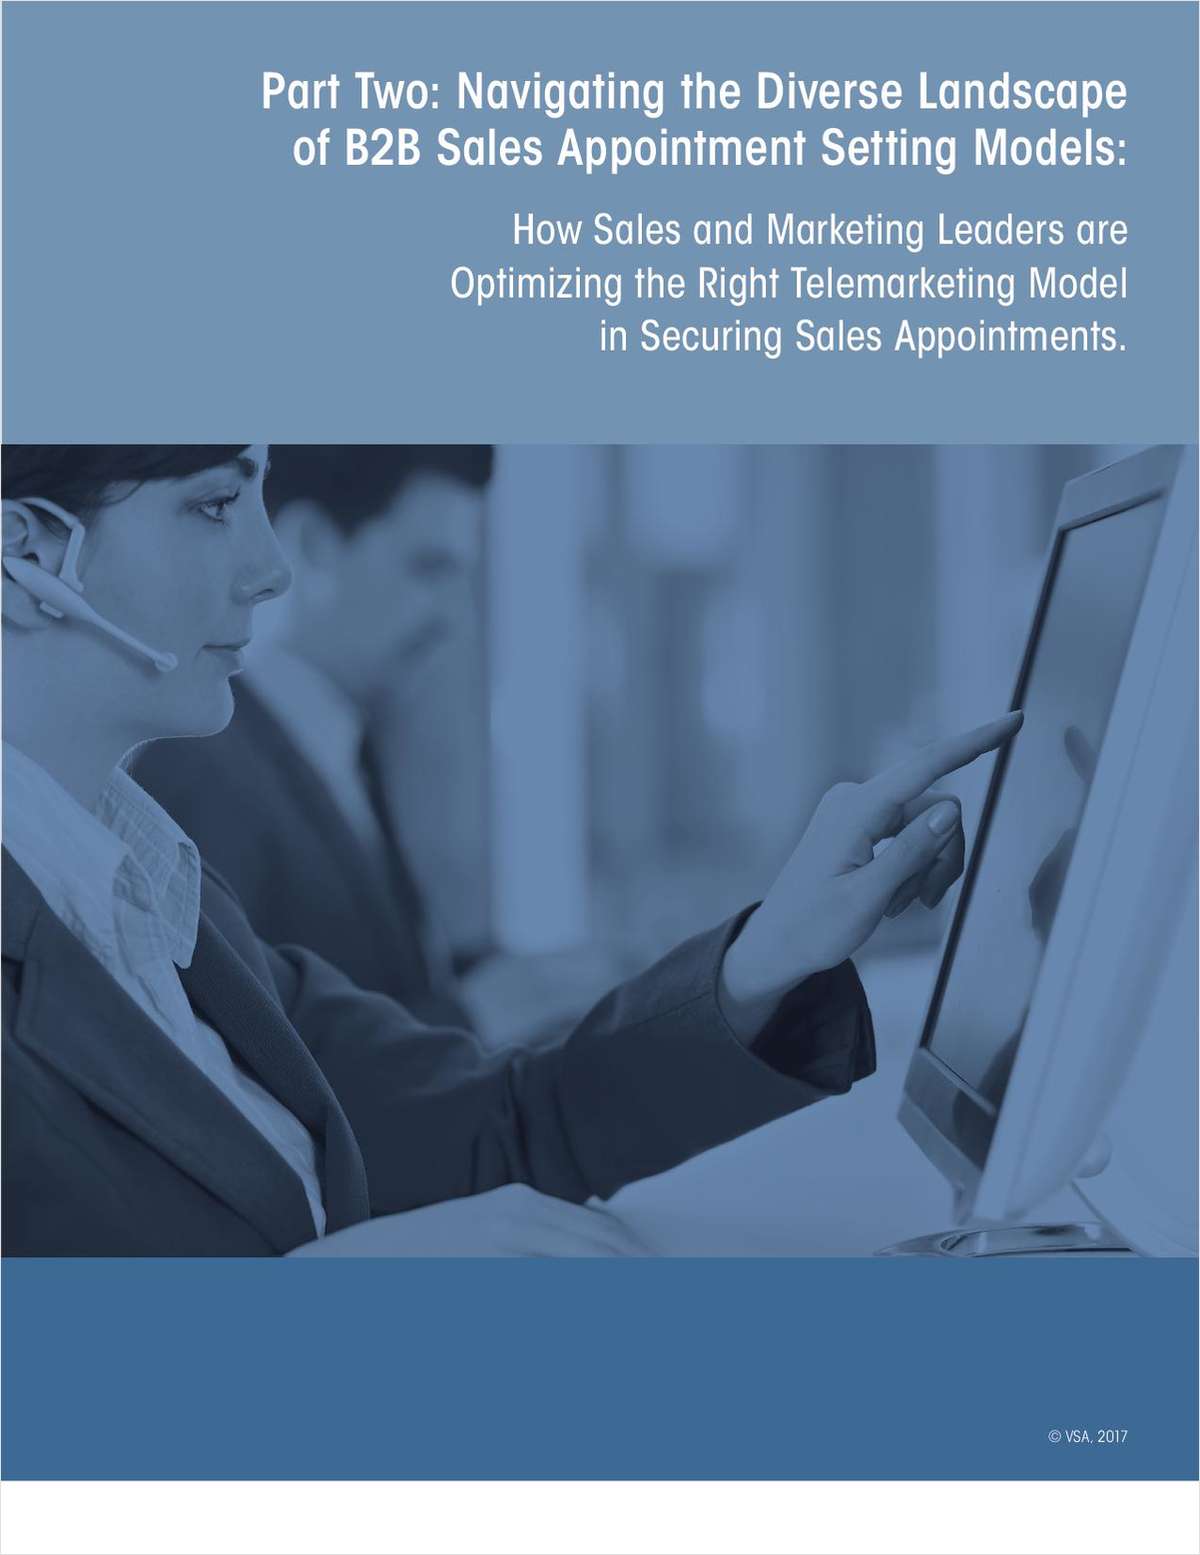 Part Two: Navigating the Diverse Landscape of B2B Sales Appointment Setting Models: